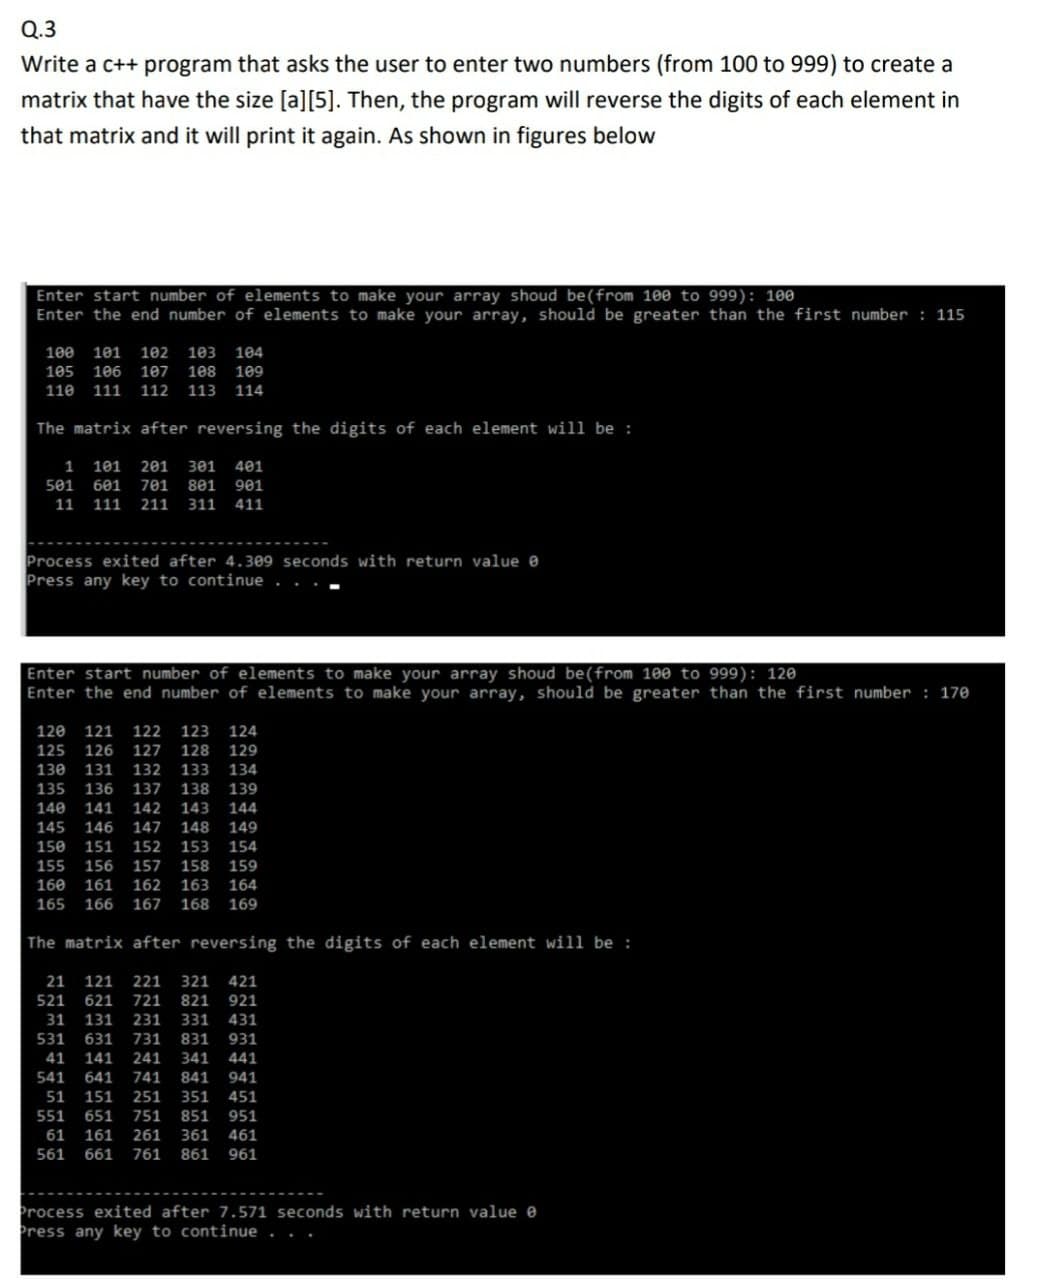 Q.3
Write a c++ program that asks the user to enter two numbers (from 100 to 999) to create a
matrix that have the size [a][5]. Then, the program will reverse the digits of each element in
that matrix and it will print it again. As shown in figures below
Enter start number of elements to make your array shoud be(from 100 to 999): 100
Enter the end number of elements to make your array, should be greater than the first number : 115
100 101
102
103 104
105
106
107
108
109
110
111
112
113
114
The matrix after reversing the digits of each element will be:
1
101 201 301 401
501
601
701
801 901
11
111
211
311
411
Process exited after 4.309 seconds with return value e
Press any key to continue
Enter start number of elements to make your array shoud be(from 100 to 999): 120
Enter the end number of elements to make your array, should be greater than the first number : 170
120
121
122
123
124
125
126
127
128
129
130
131
132
133
134
135
136
137
138
139
140
141
142
143
144
145
146
147
148 149
150
151
152
153
154
155
156
157
158
159
160
161
162
163
164
165
166 167 168 169
The matrix after reversing the digits of each element will be :
21
121
221
321 421
521
621
721
821 921
31
131
231
331
431
531
631
731
831
931
41
141
241
341
441
541
641
741
841
941
51
151
251
351
451
551
651
751
851
951
61
161
261
361
461
561
661
761
861
961
Process exited after 7.571 seconds with return value e
Press any key to continue
